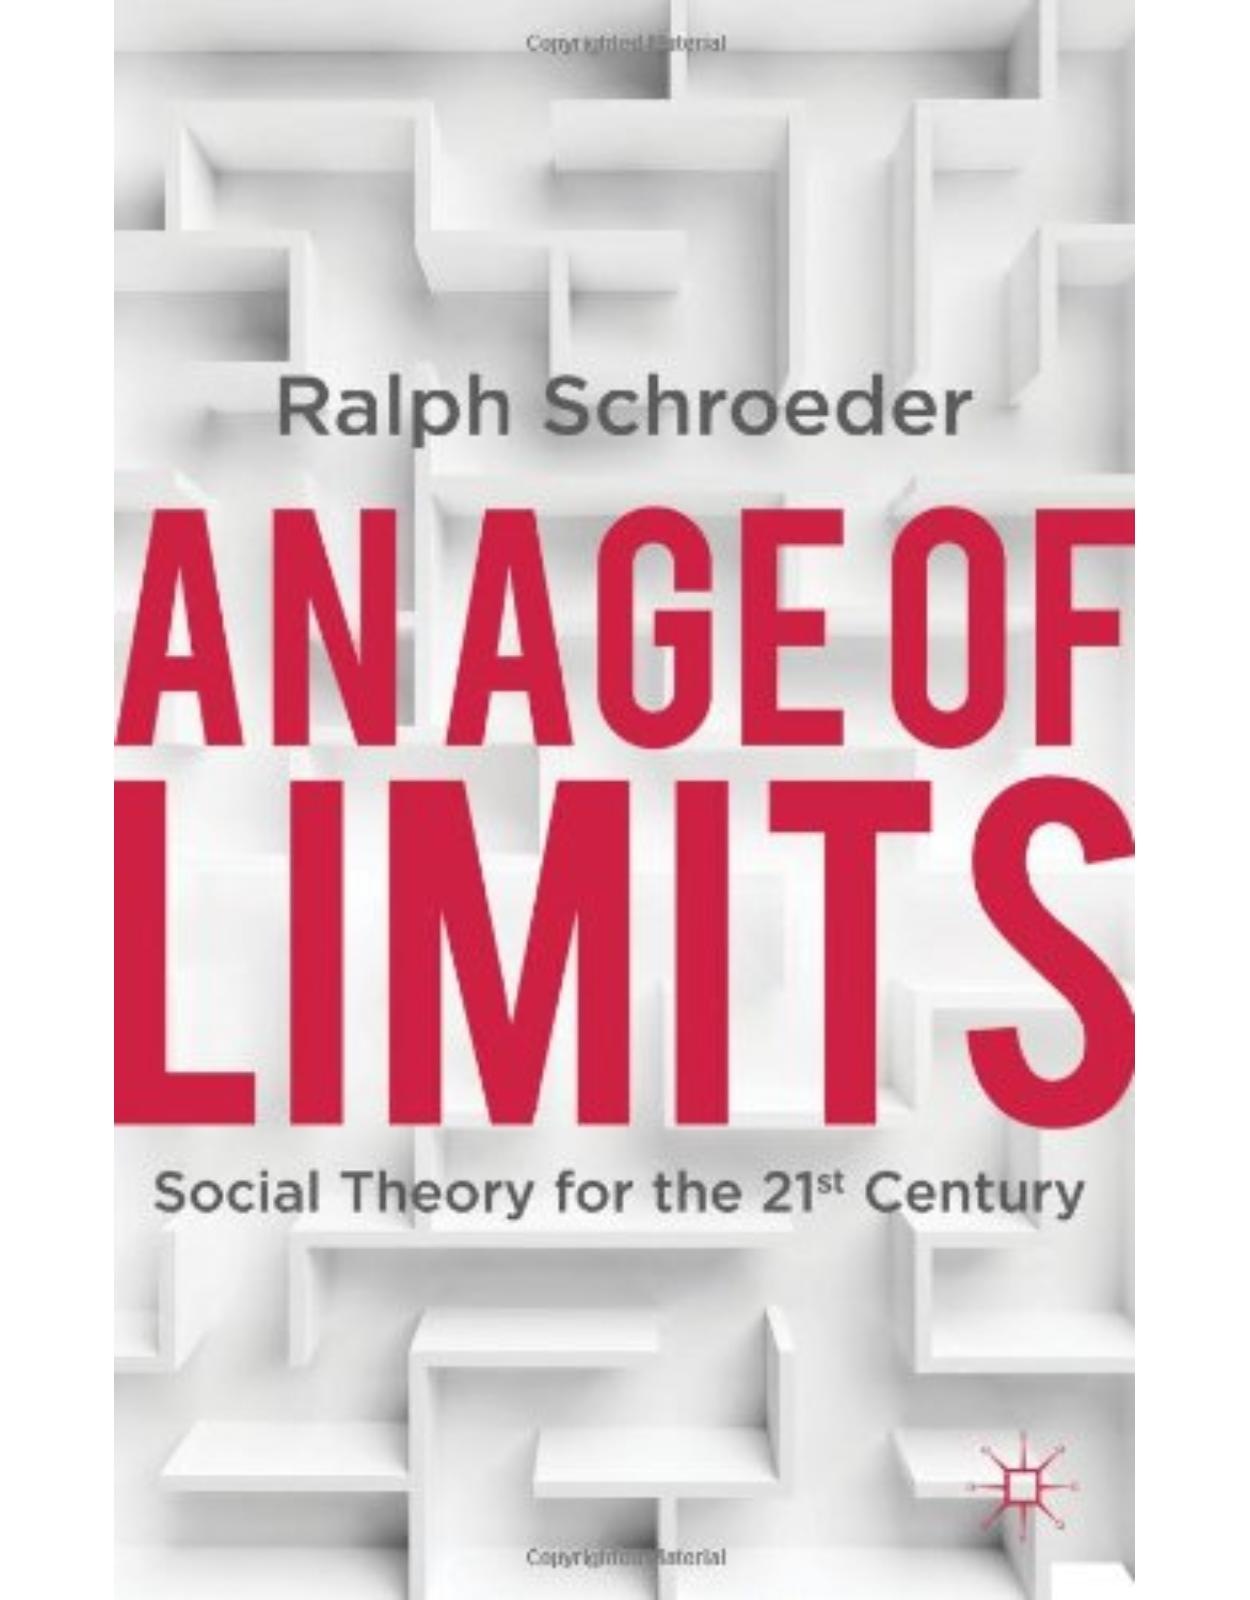 An Age of Limits: Social Theory for the 21st Century